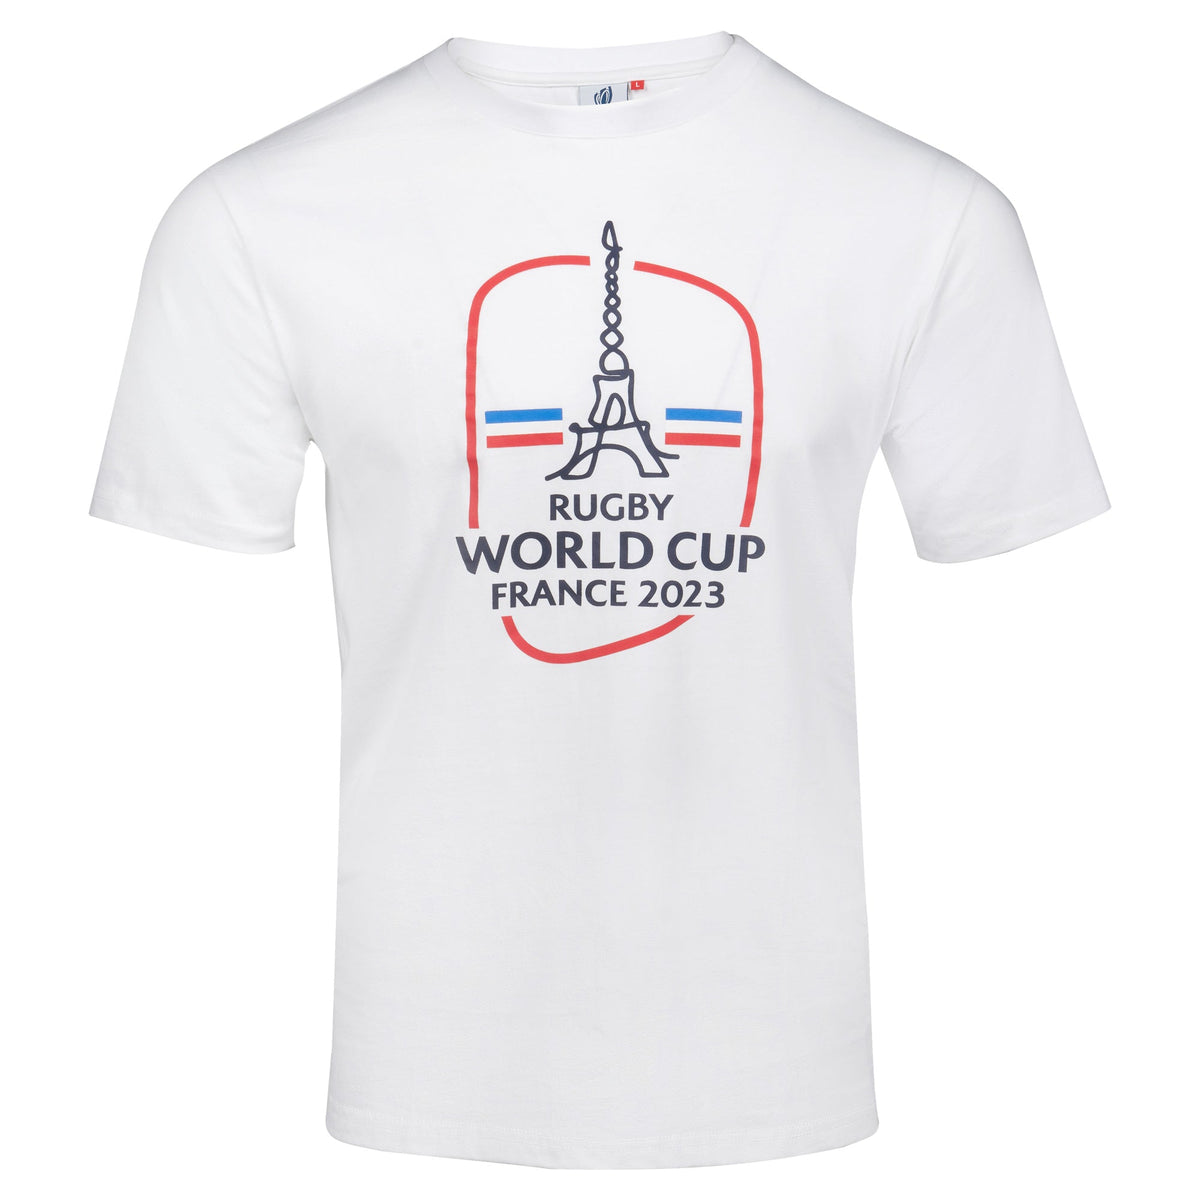 Eiffel Tower T-Shirt - White |T-Shirt | Rugby World Cup Collection | Absolute Rugby